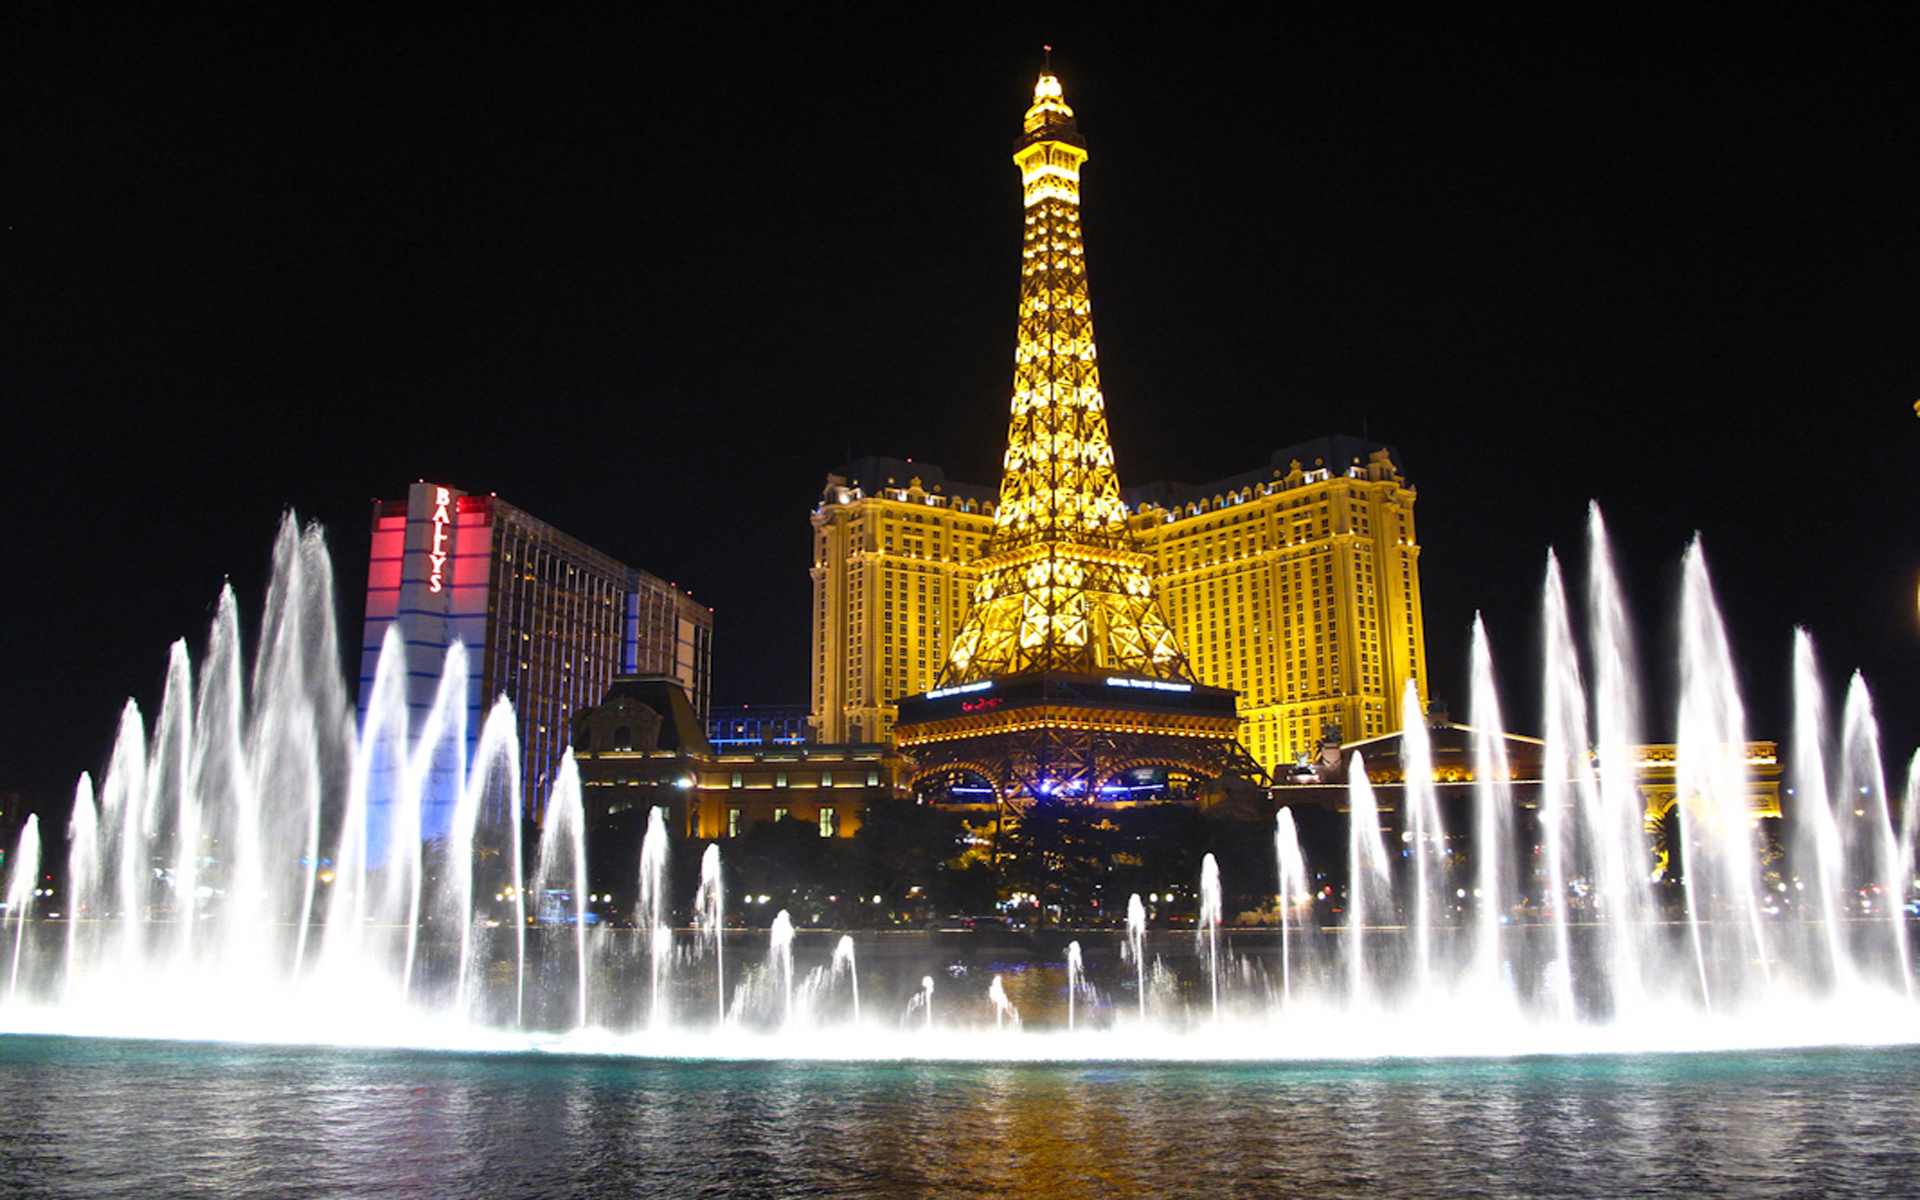 Bellagio Fountains And Hotel Paris With Eiffel Tower Las